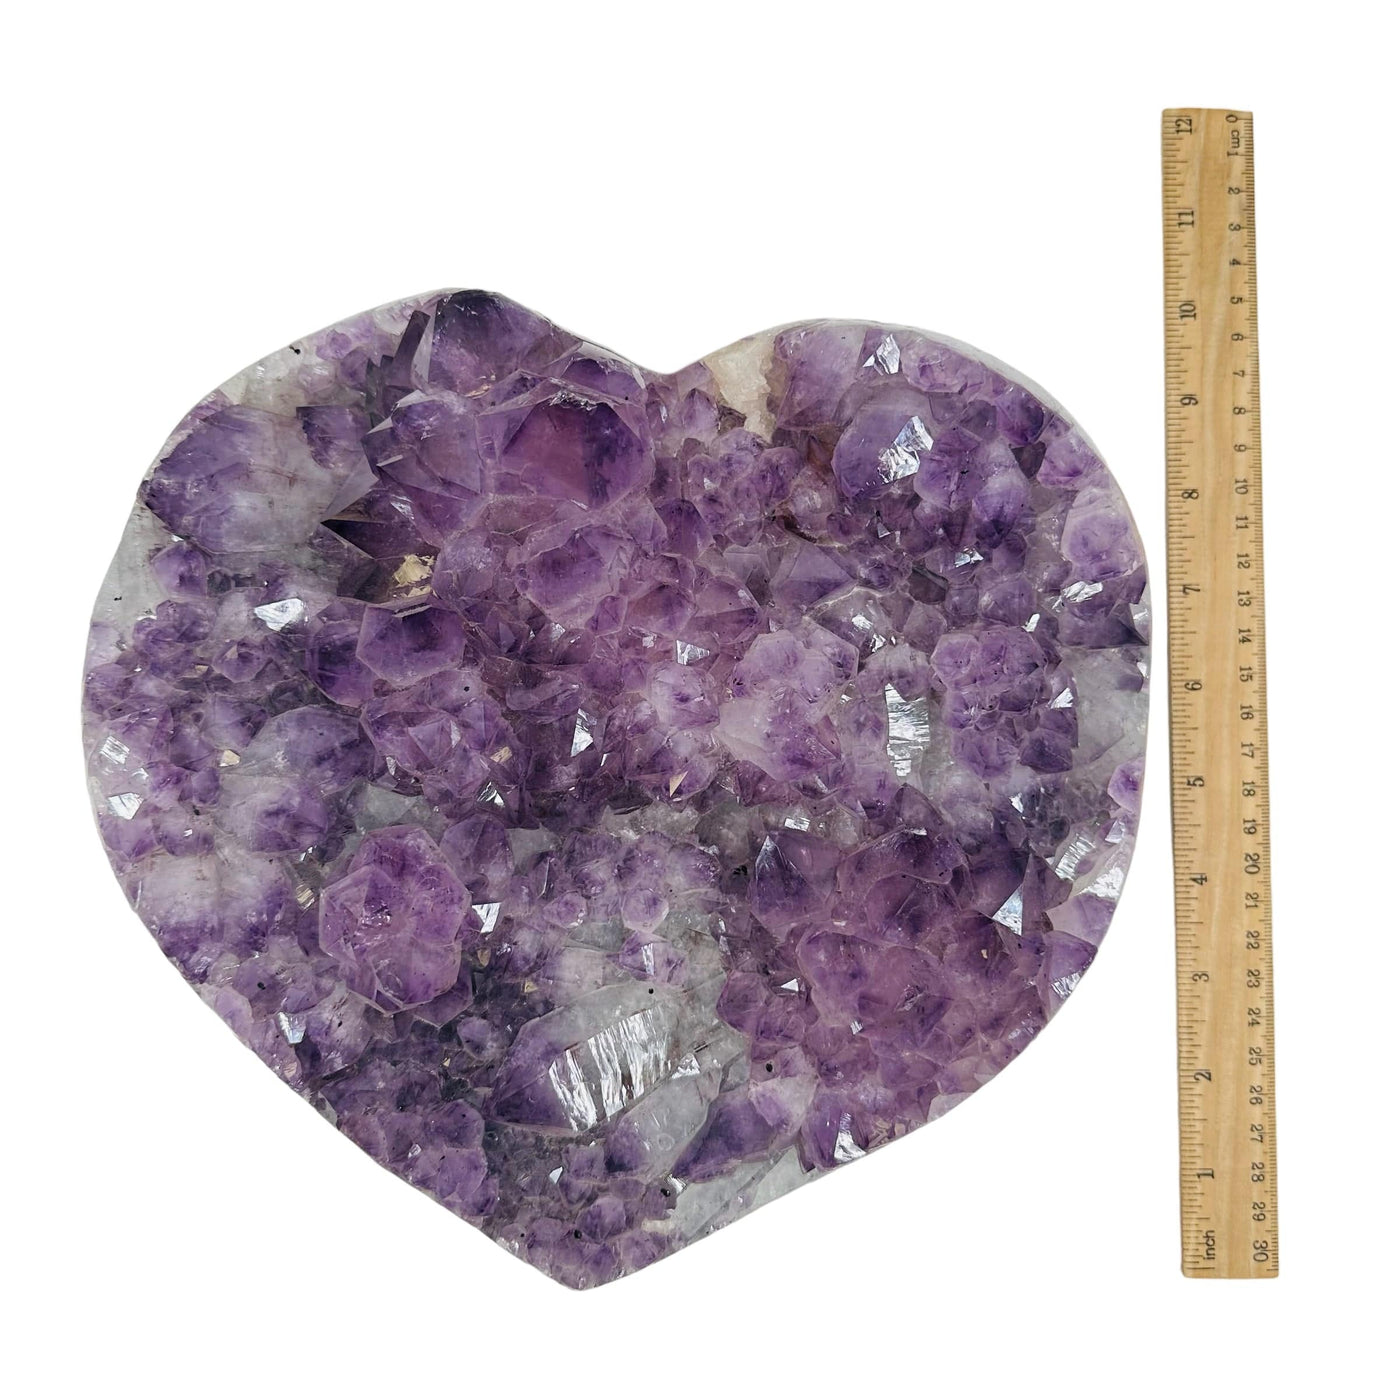 Large Amethyst Cluster Heart - Natural Amethyst next to a ruler for size reference 